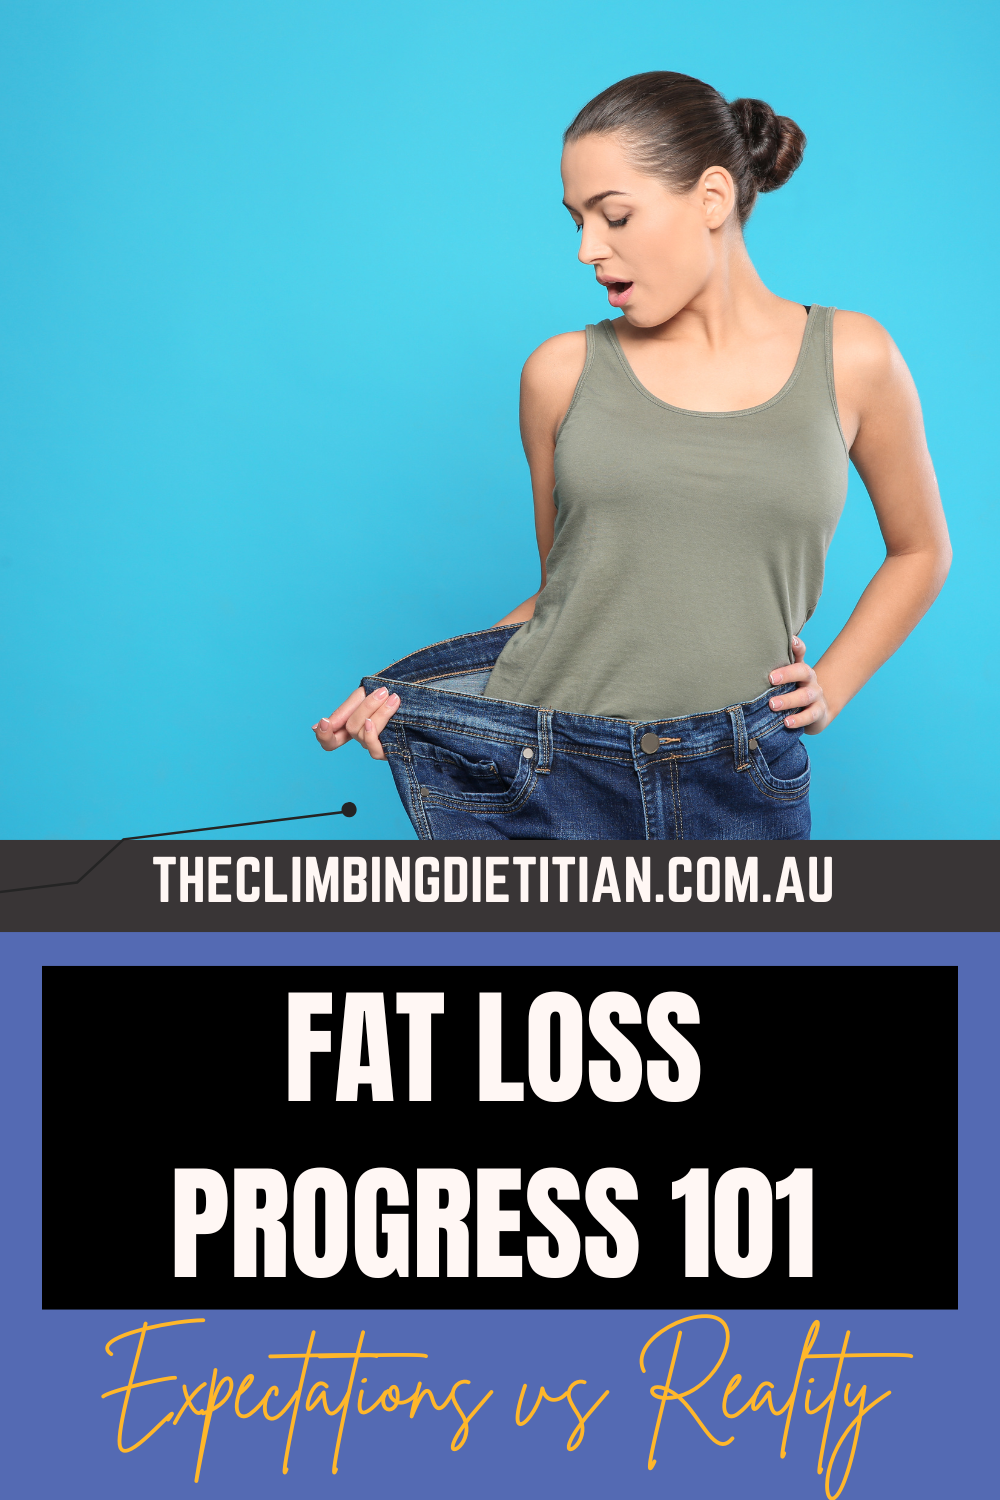 Fat Loss Progress 101 - Expectations-vs-Reality-Dietitian-Nutritionist-Weight Loss Nutrition-Brisbane-Sports-Dietitian